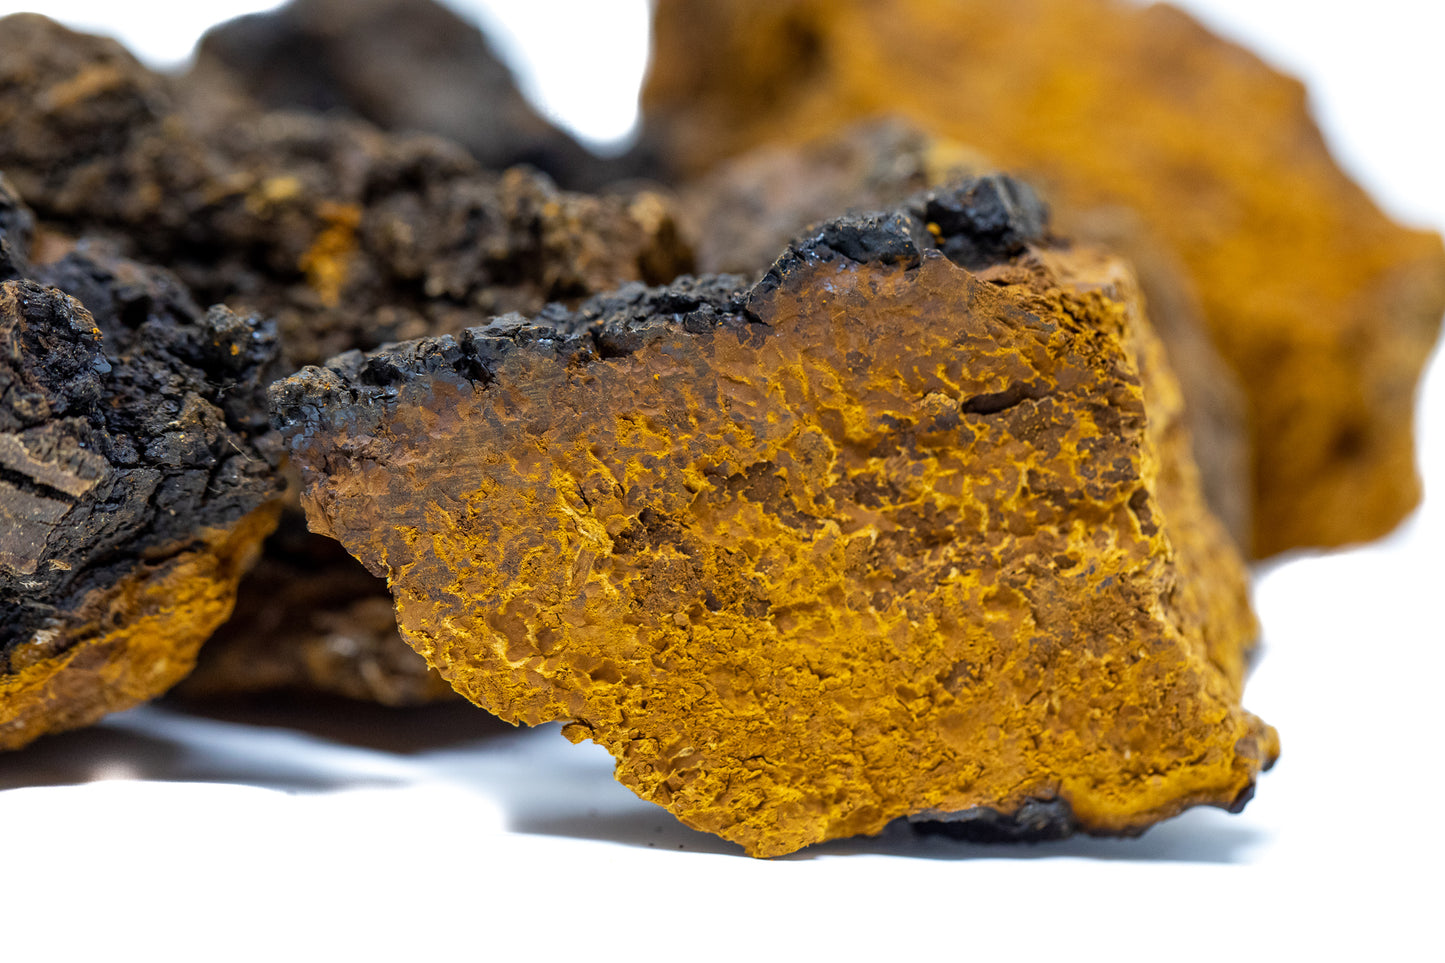 Photo of chaga mushrooms|Photo of chaga mushrooms|Photo of Shen Blossom freeze dried silver birch chaga|Photo of chaga mushroom tea|Photo of Shen Blossom freeze dried silver birch chaga